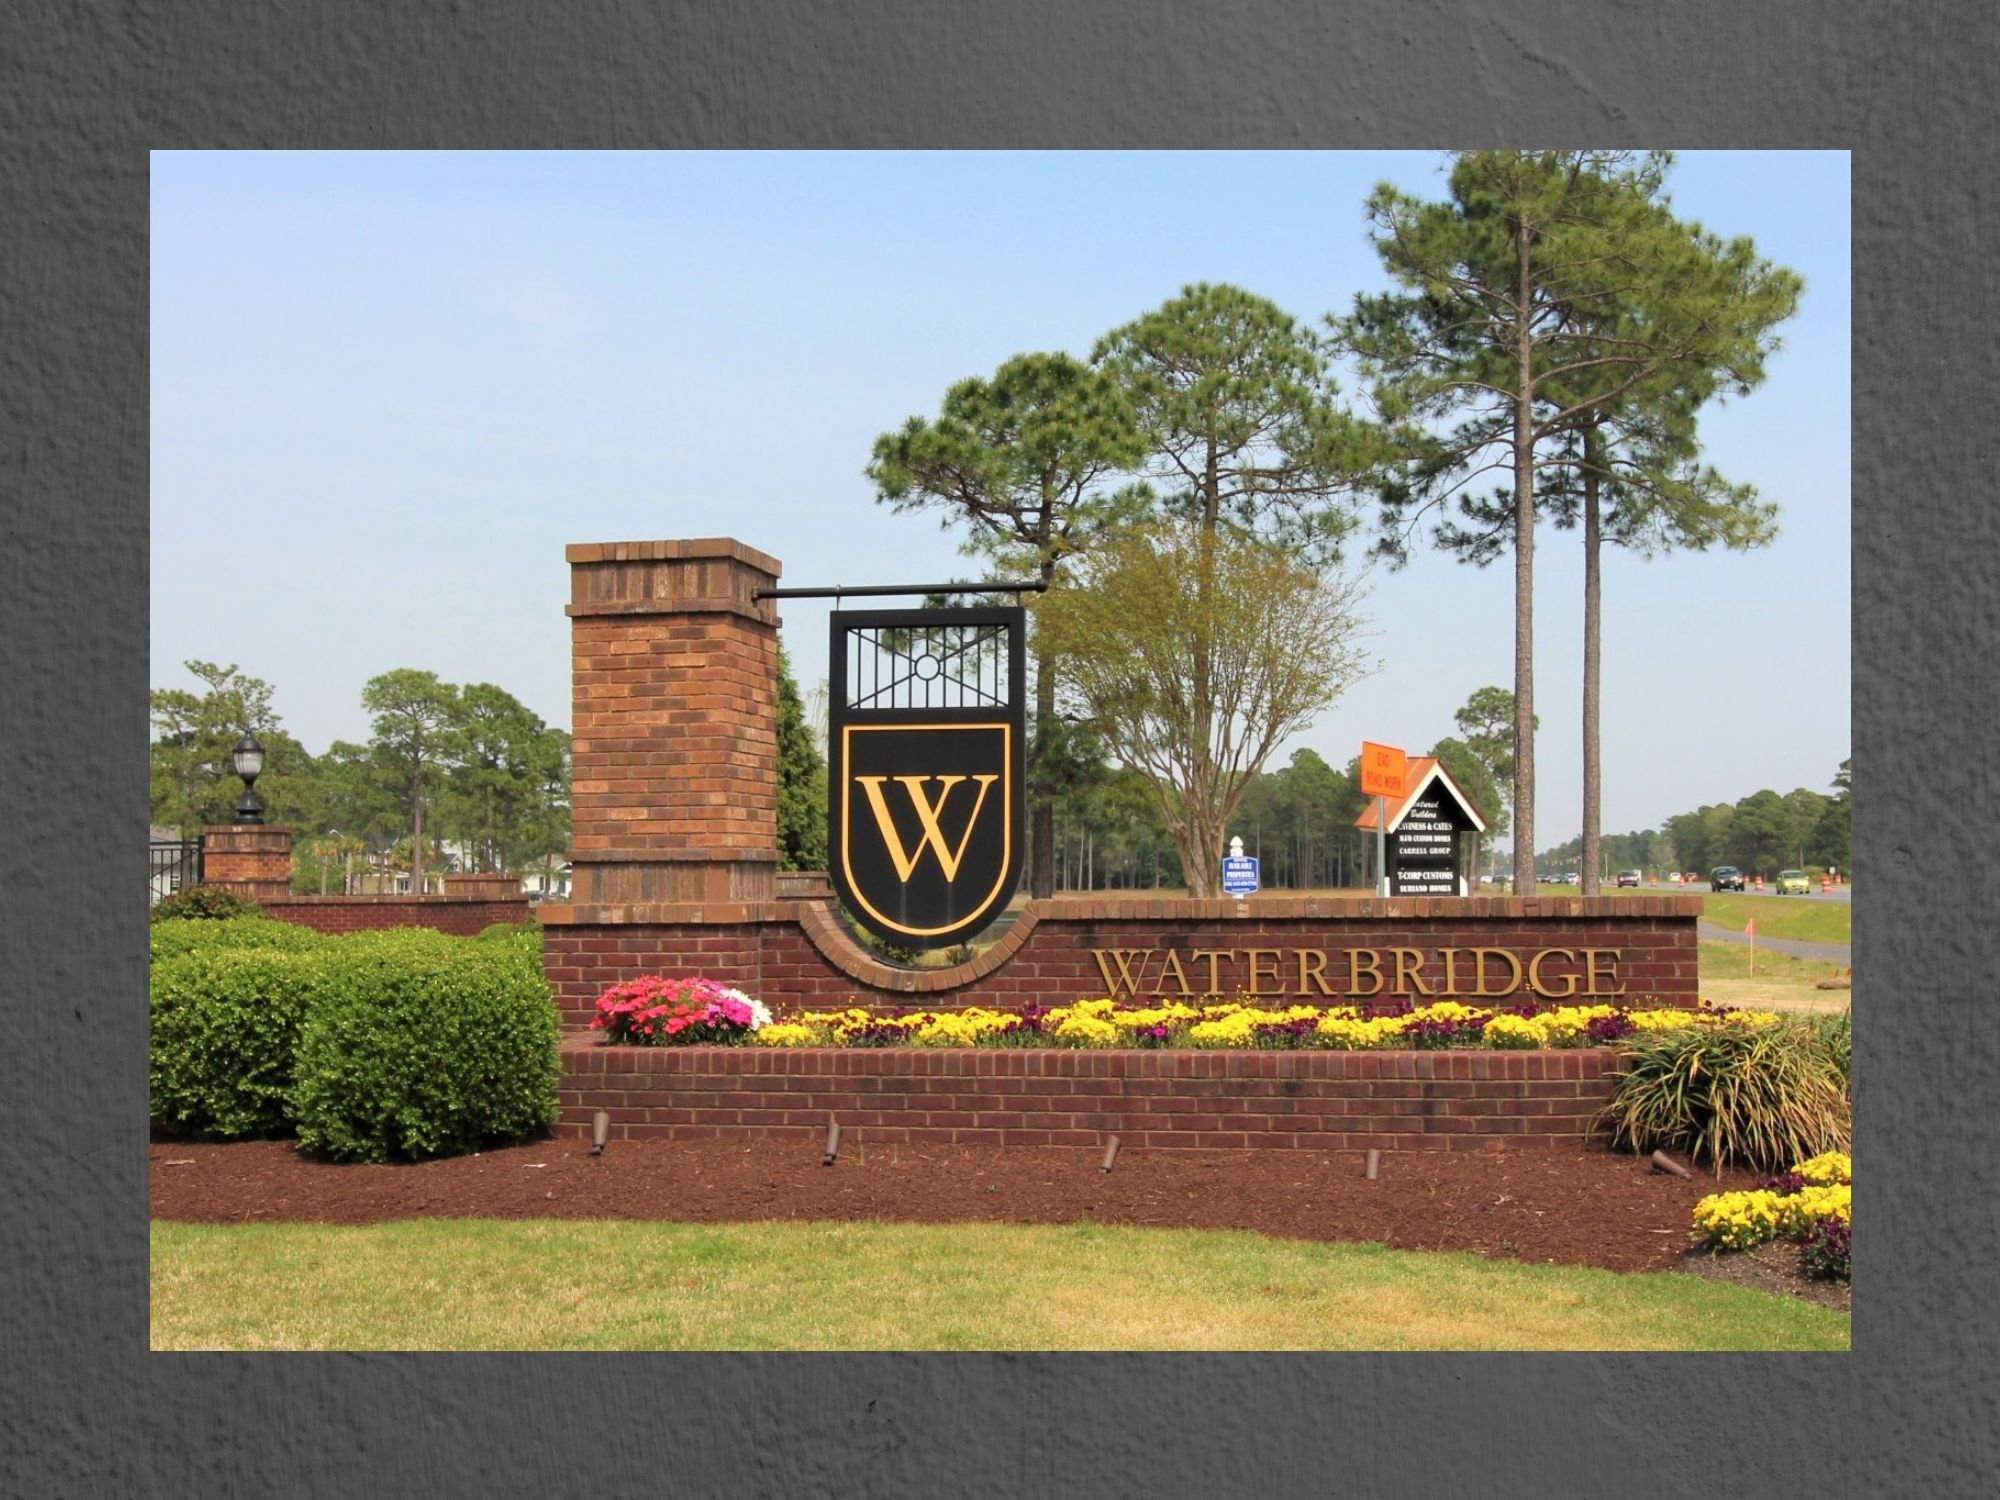 entrance to waterbridge, a neighborhood with homes for sale in carolina forest, SC